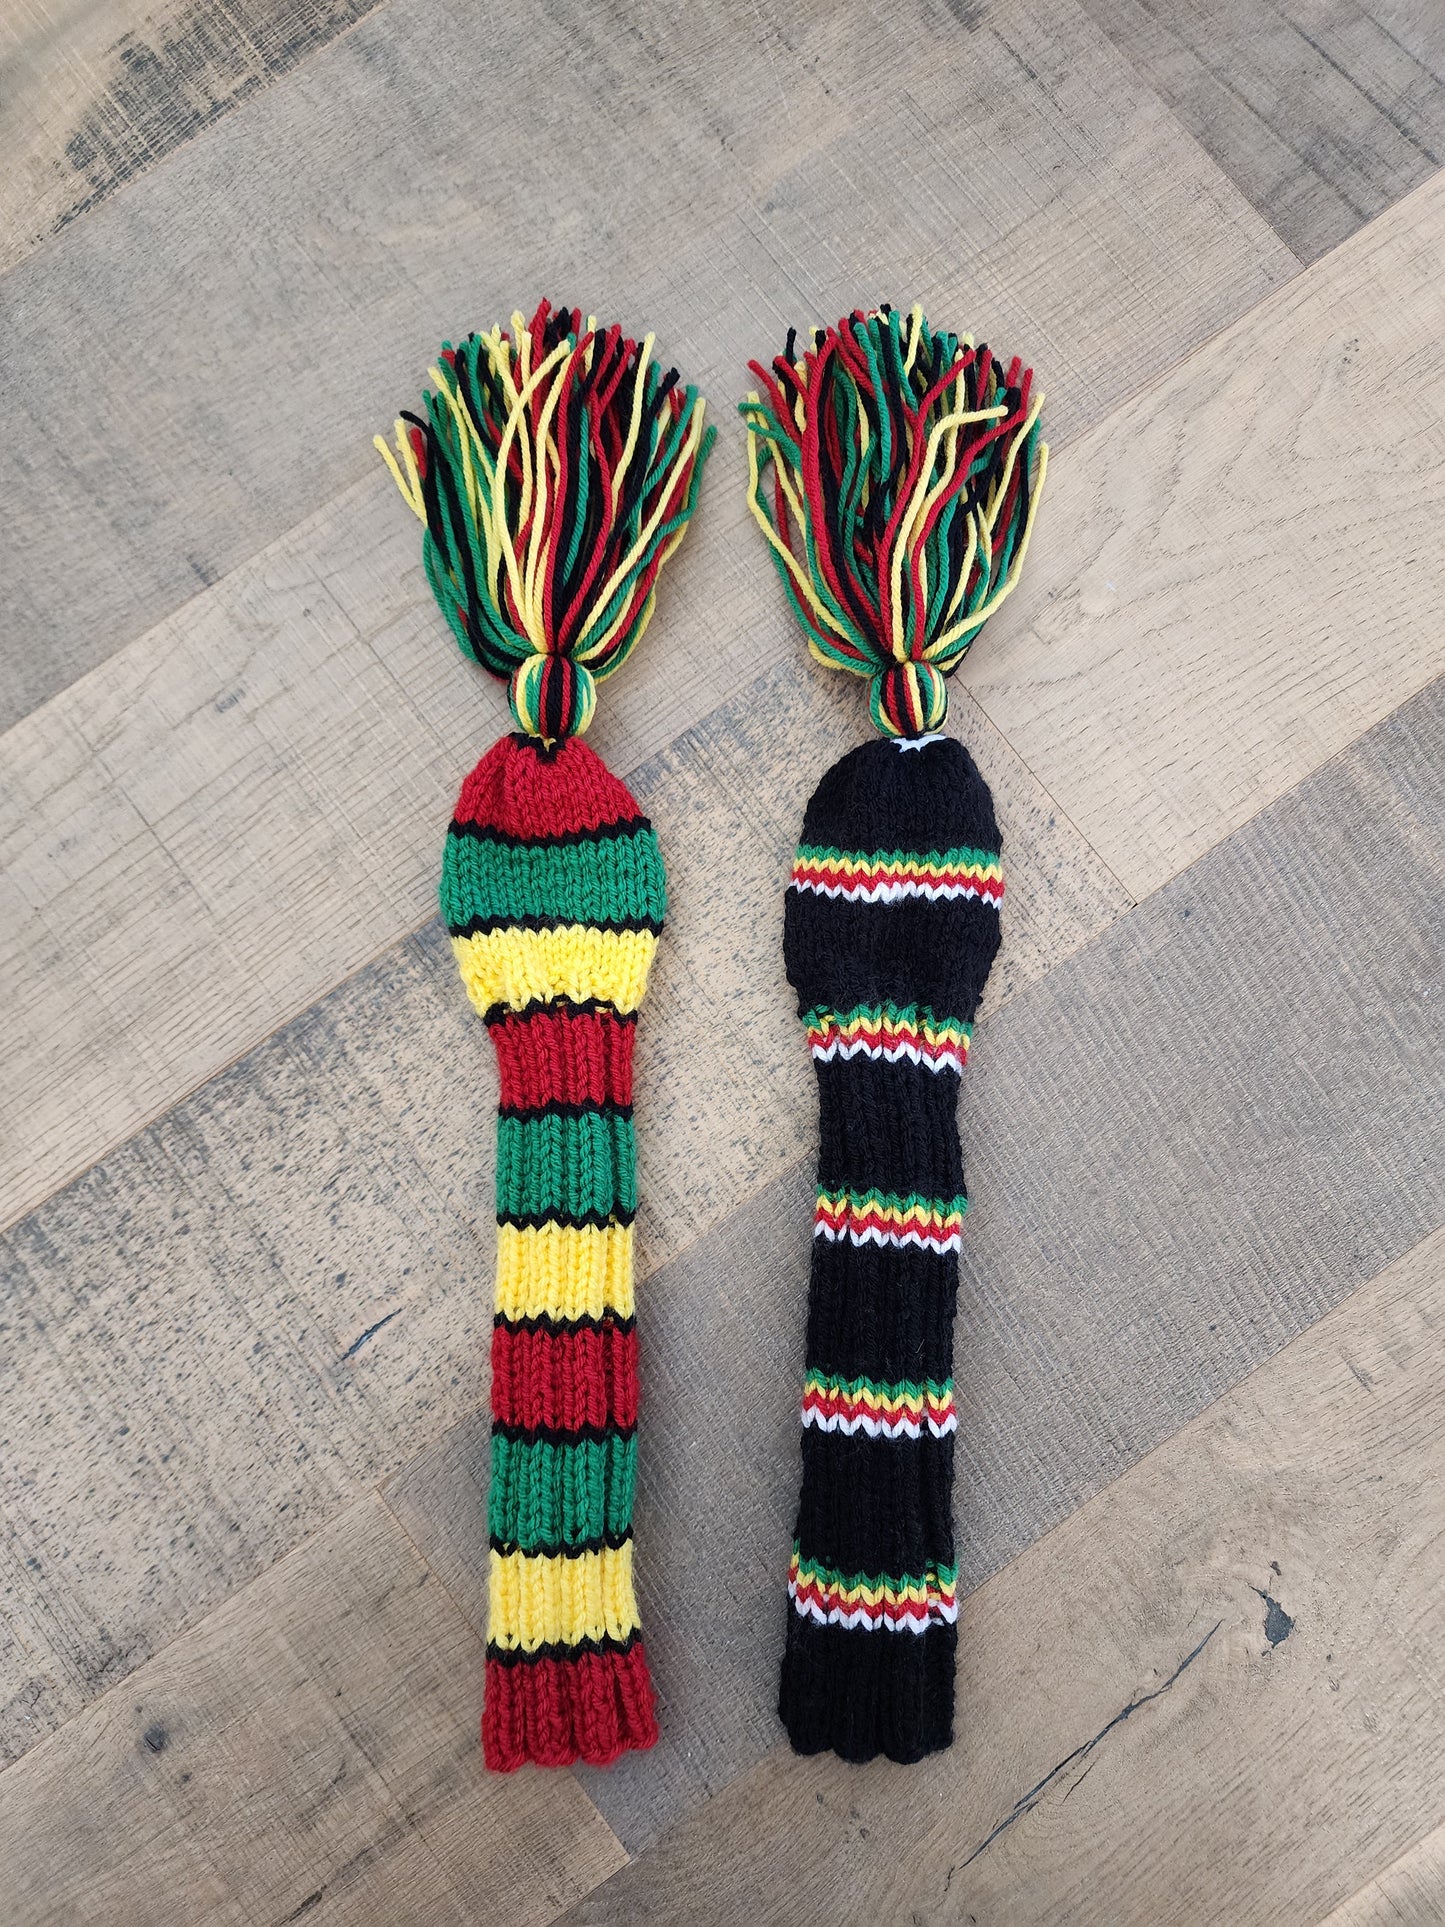 Two Golf Club Head Covers Retro-Vintage Black, Red, Yellow, Green & White with Tassels for Fairway Woods